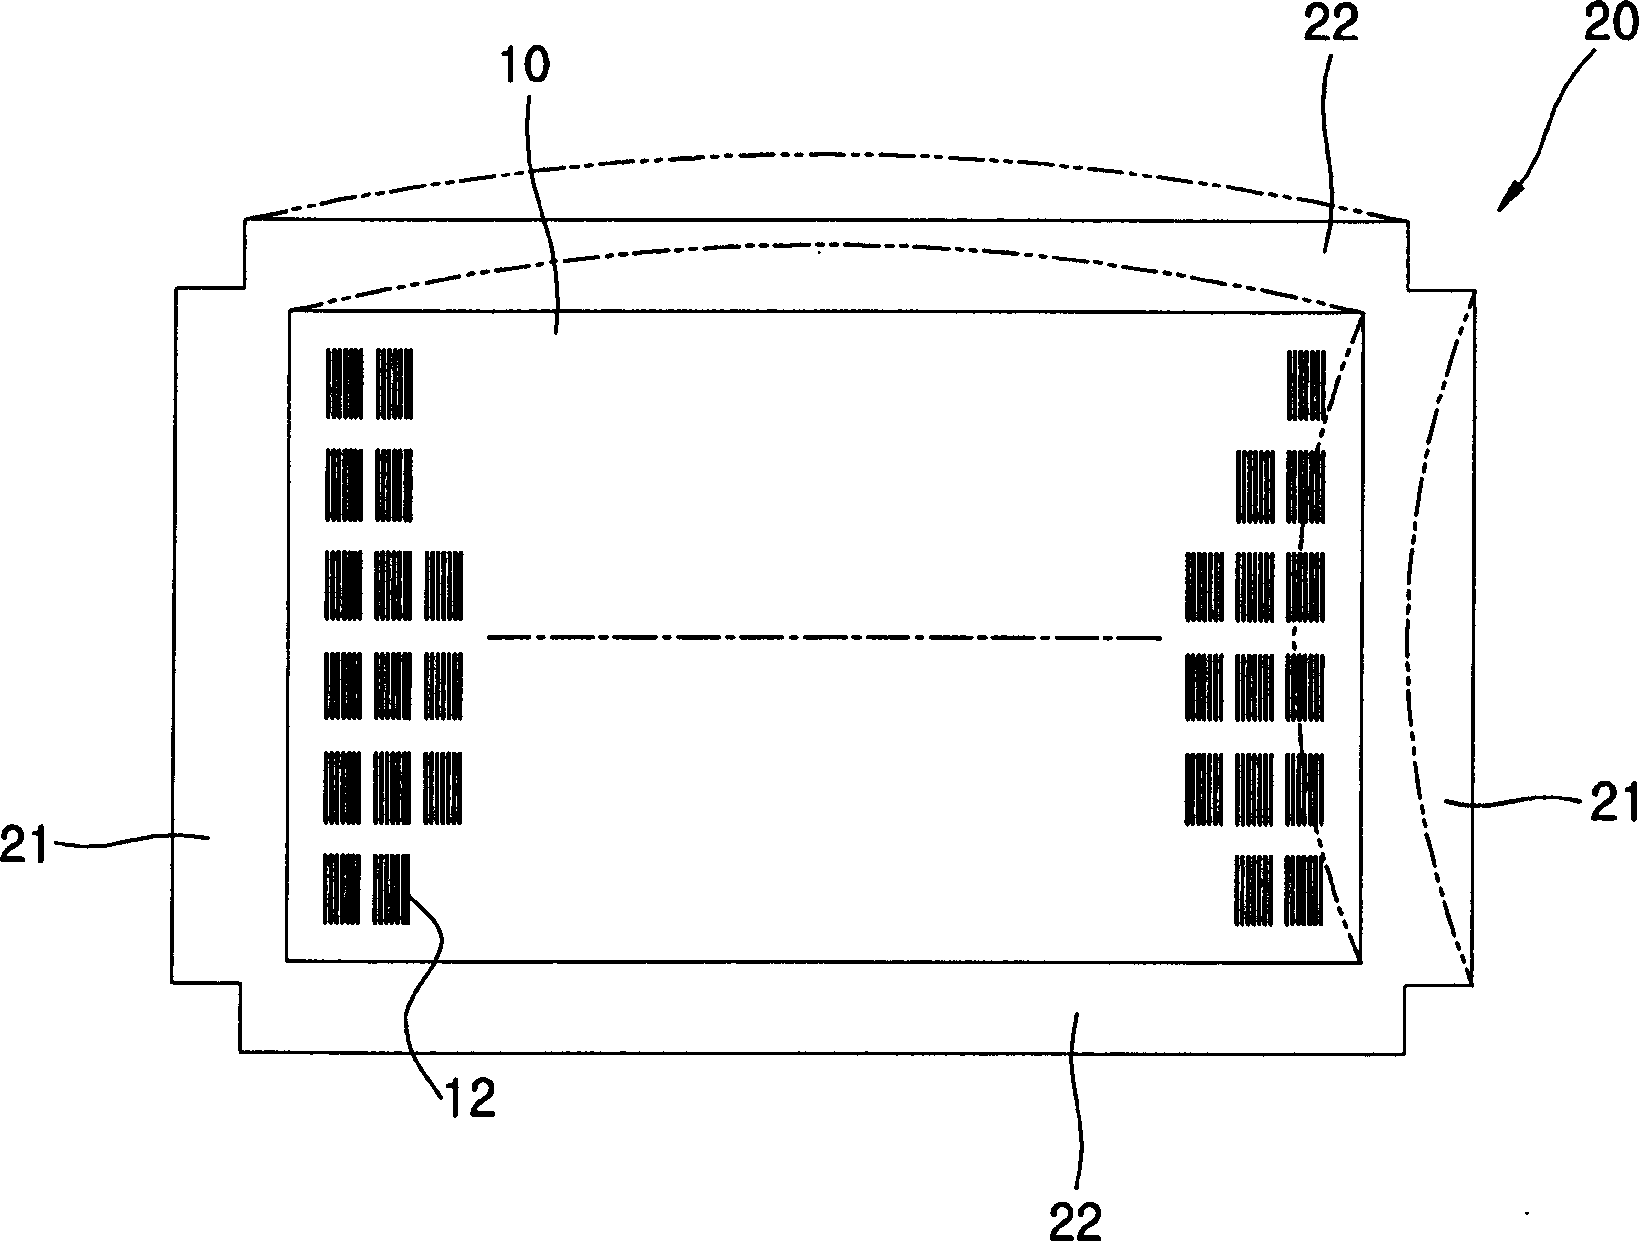 Mask assembly and mask frame assemble using same